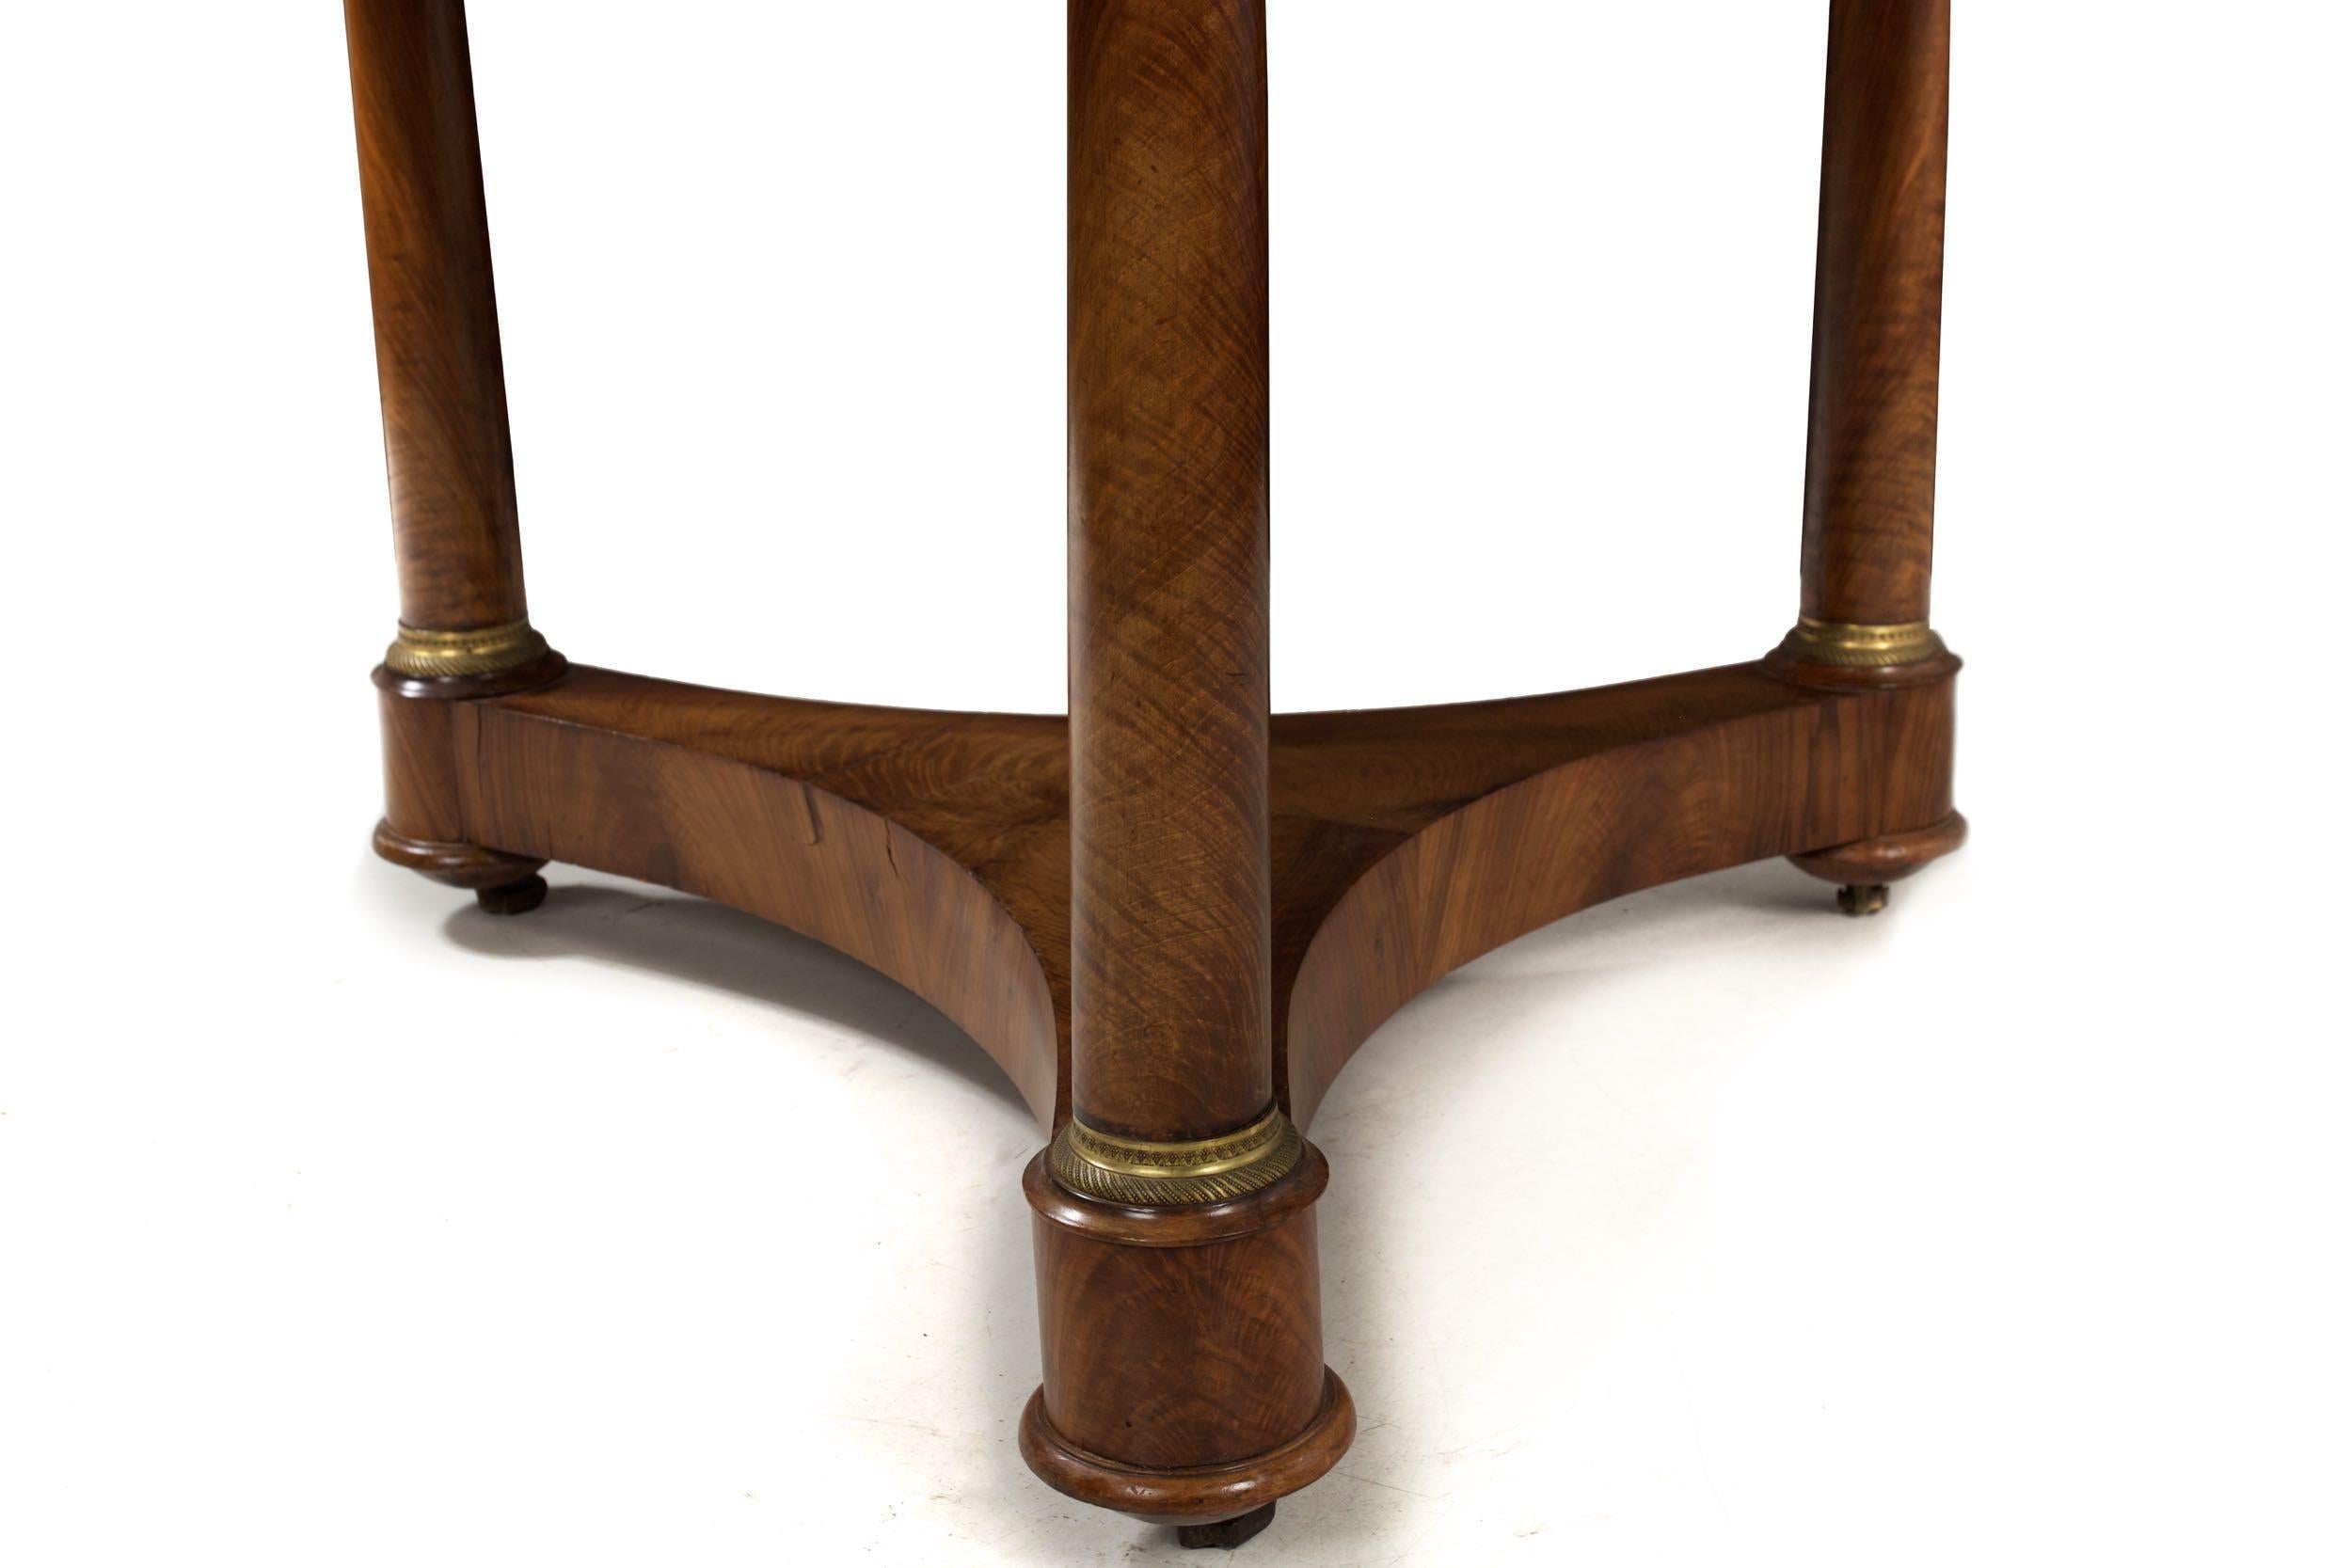 French Empire Antique Burl Walnut Center Table with Black Marble Top, circa 1815 For Sale 5